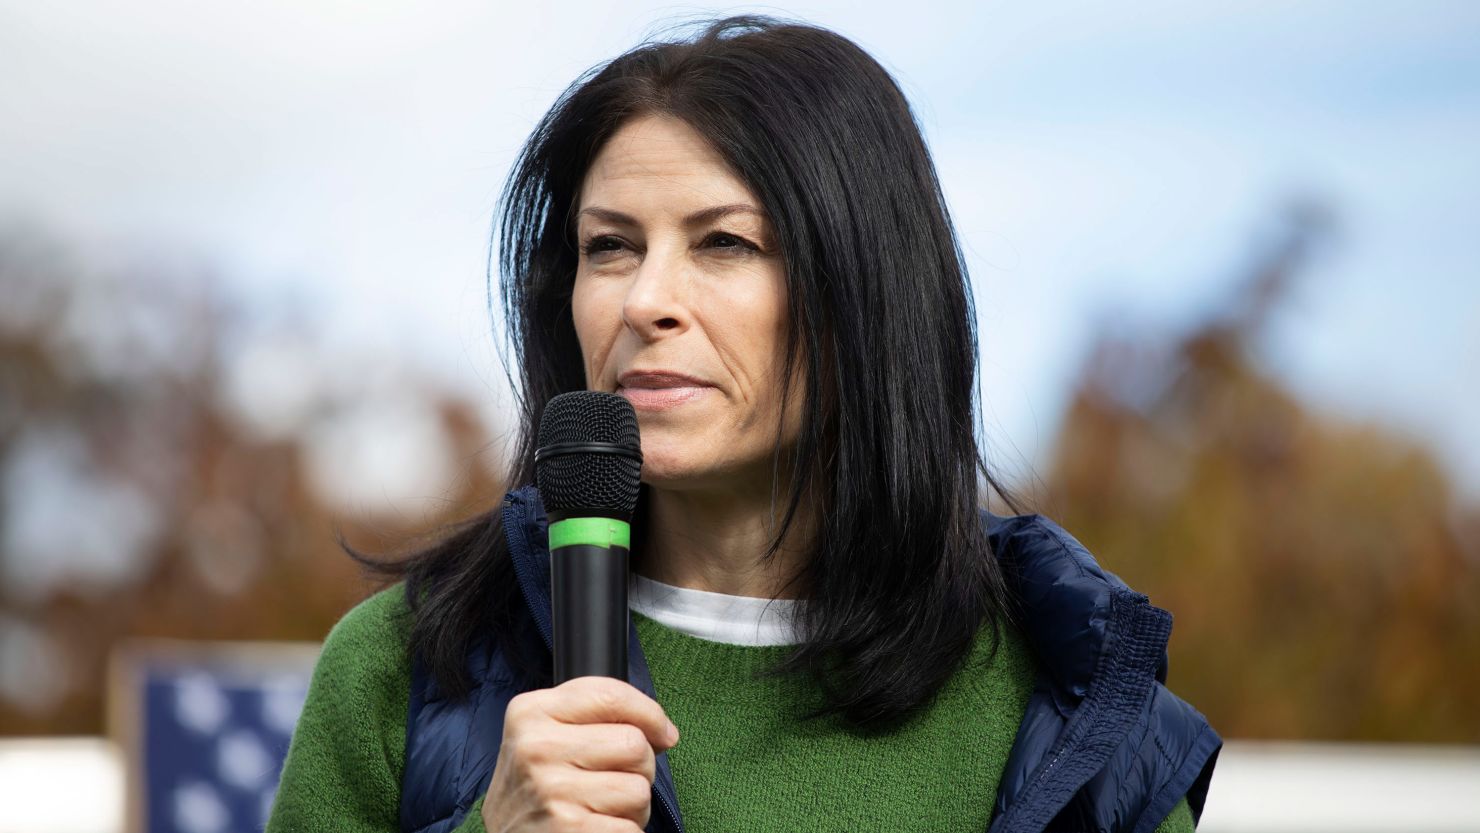 Michigan Attorney General Dana Nessel speaks at a campaign rally on October 16, 2022 in East Lansing, Michigan. 